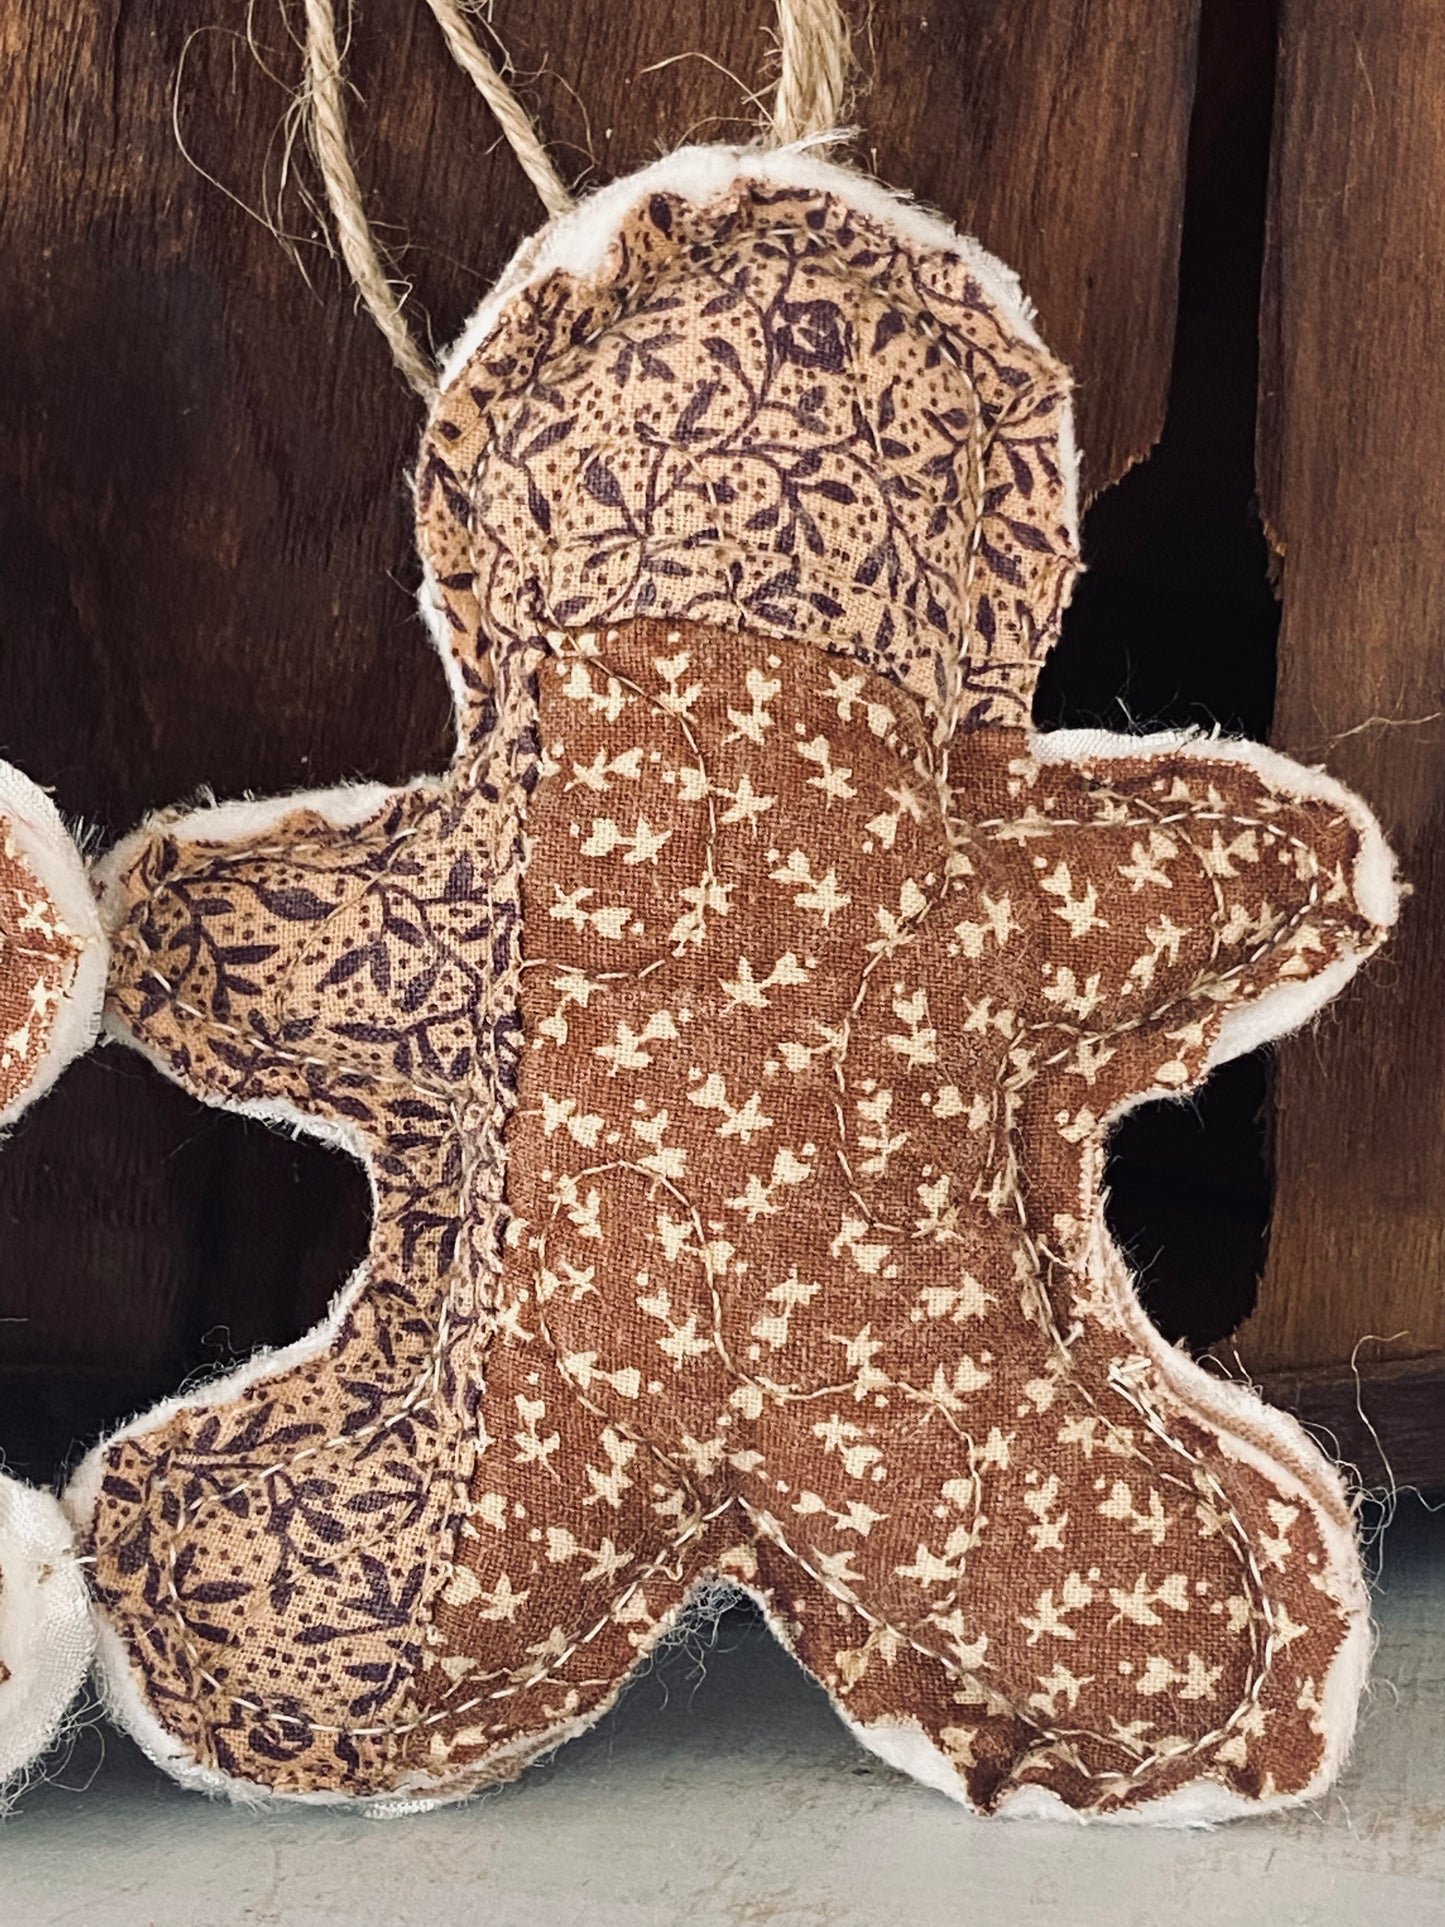 Quilted Gingerbread Men Ornaments from Vintage Quilt-set of 3